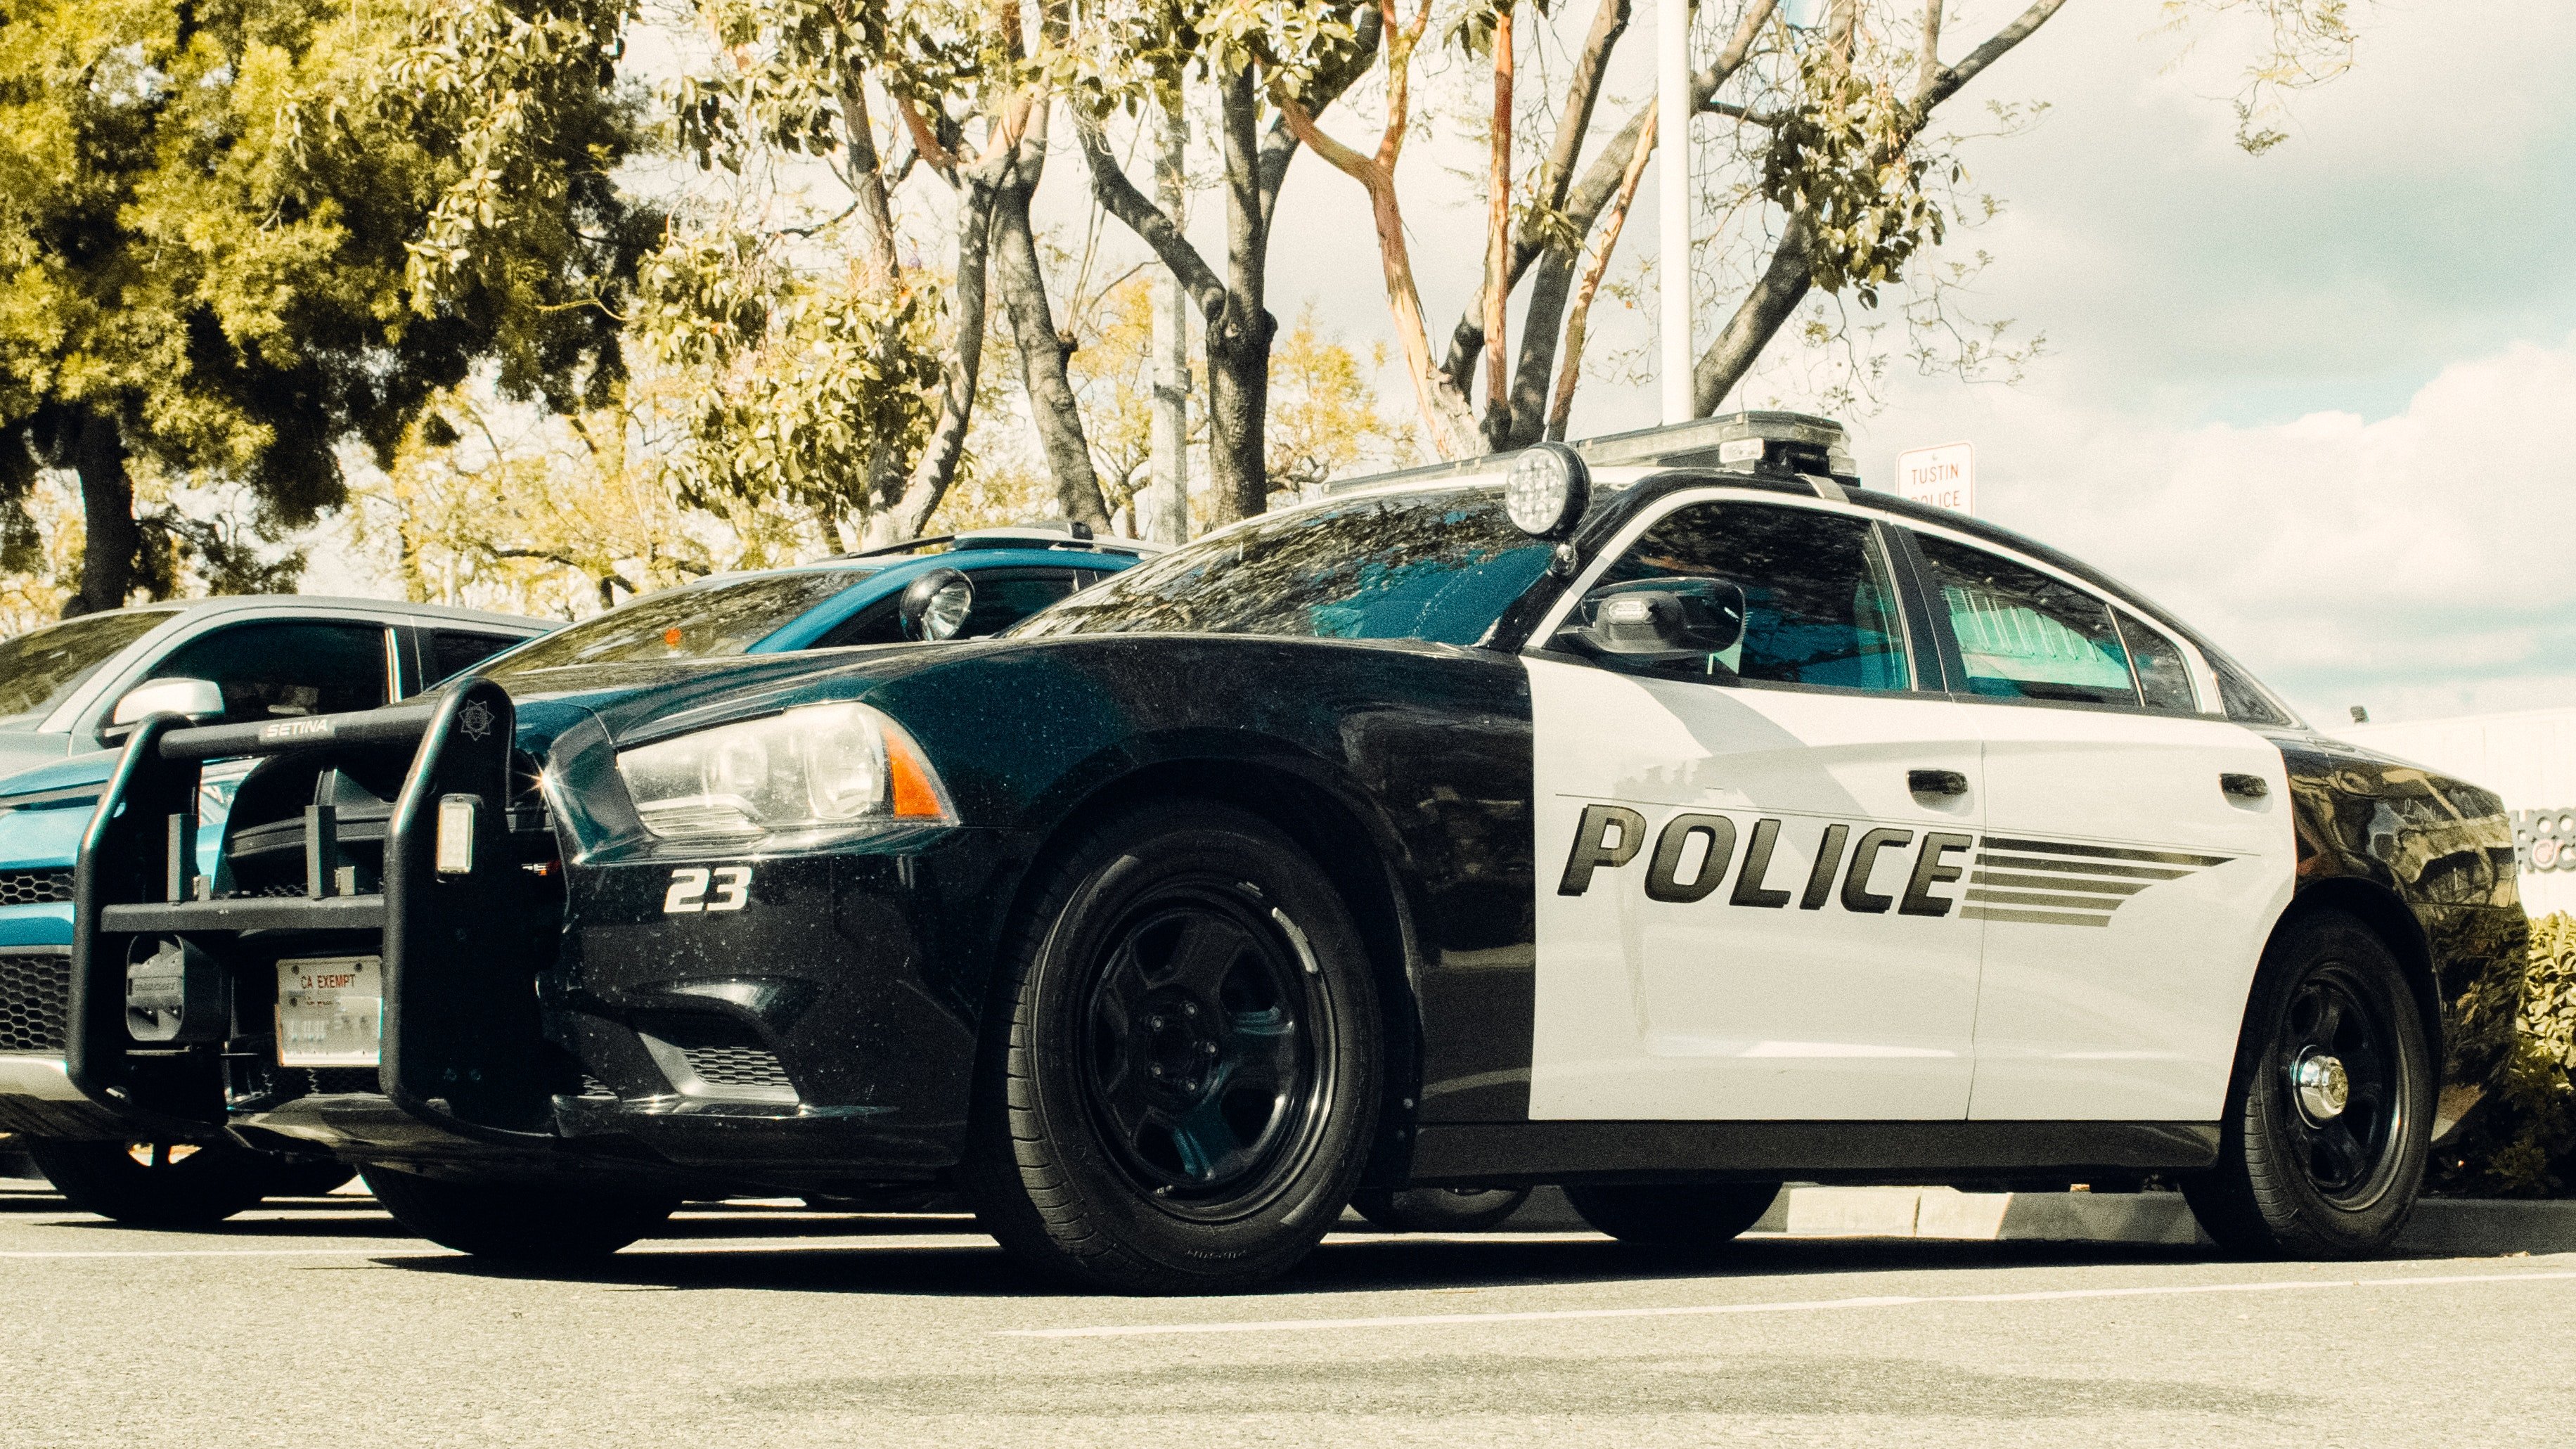 Pictured - A photo of a parked black and white police vehicle | Source: Pexels 